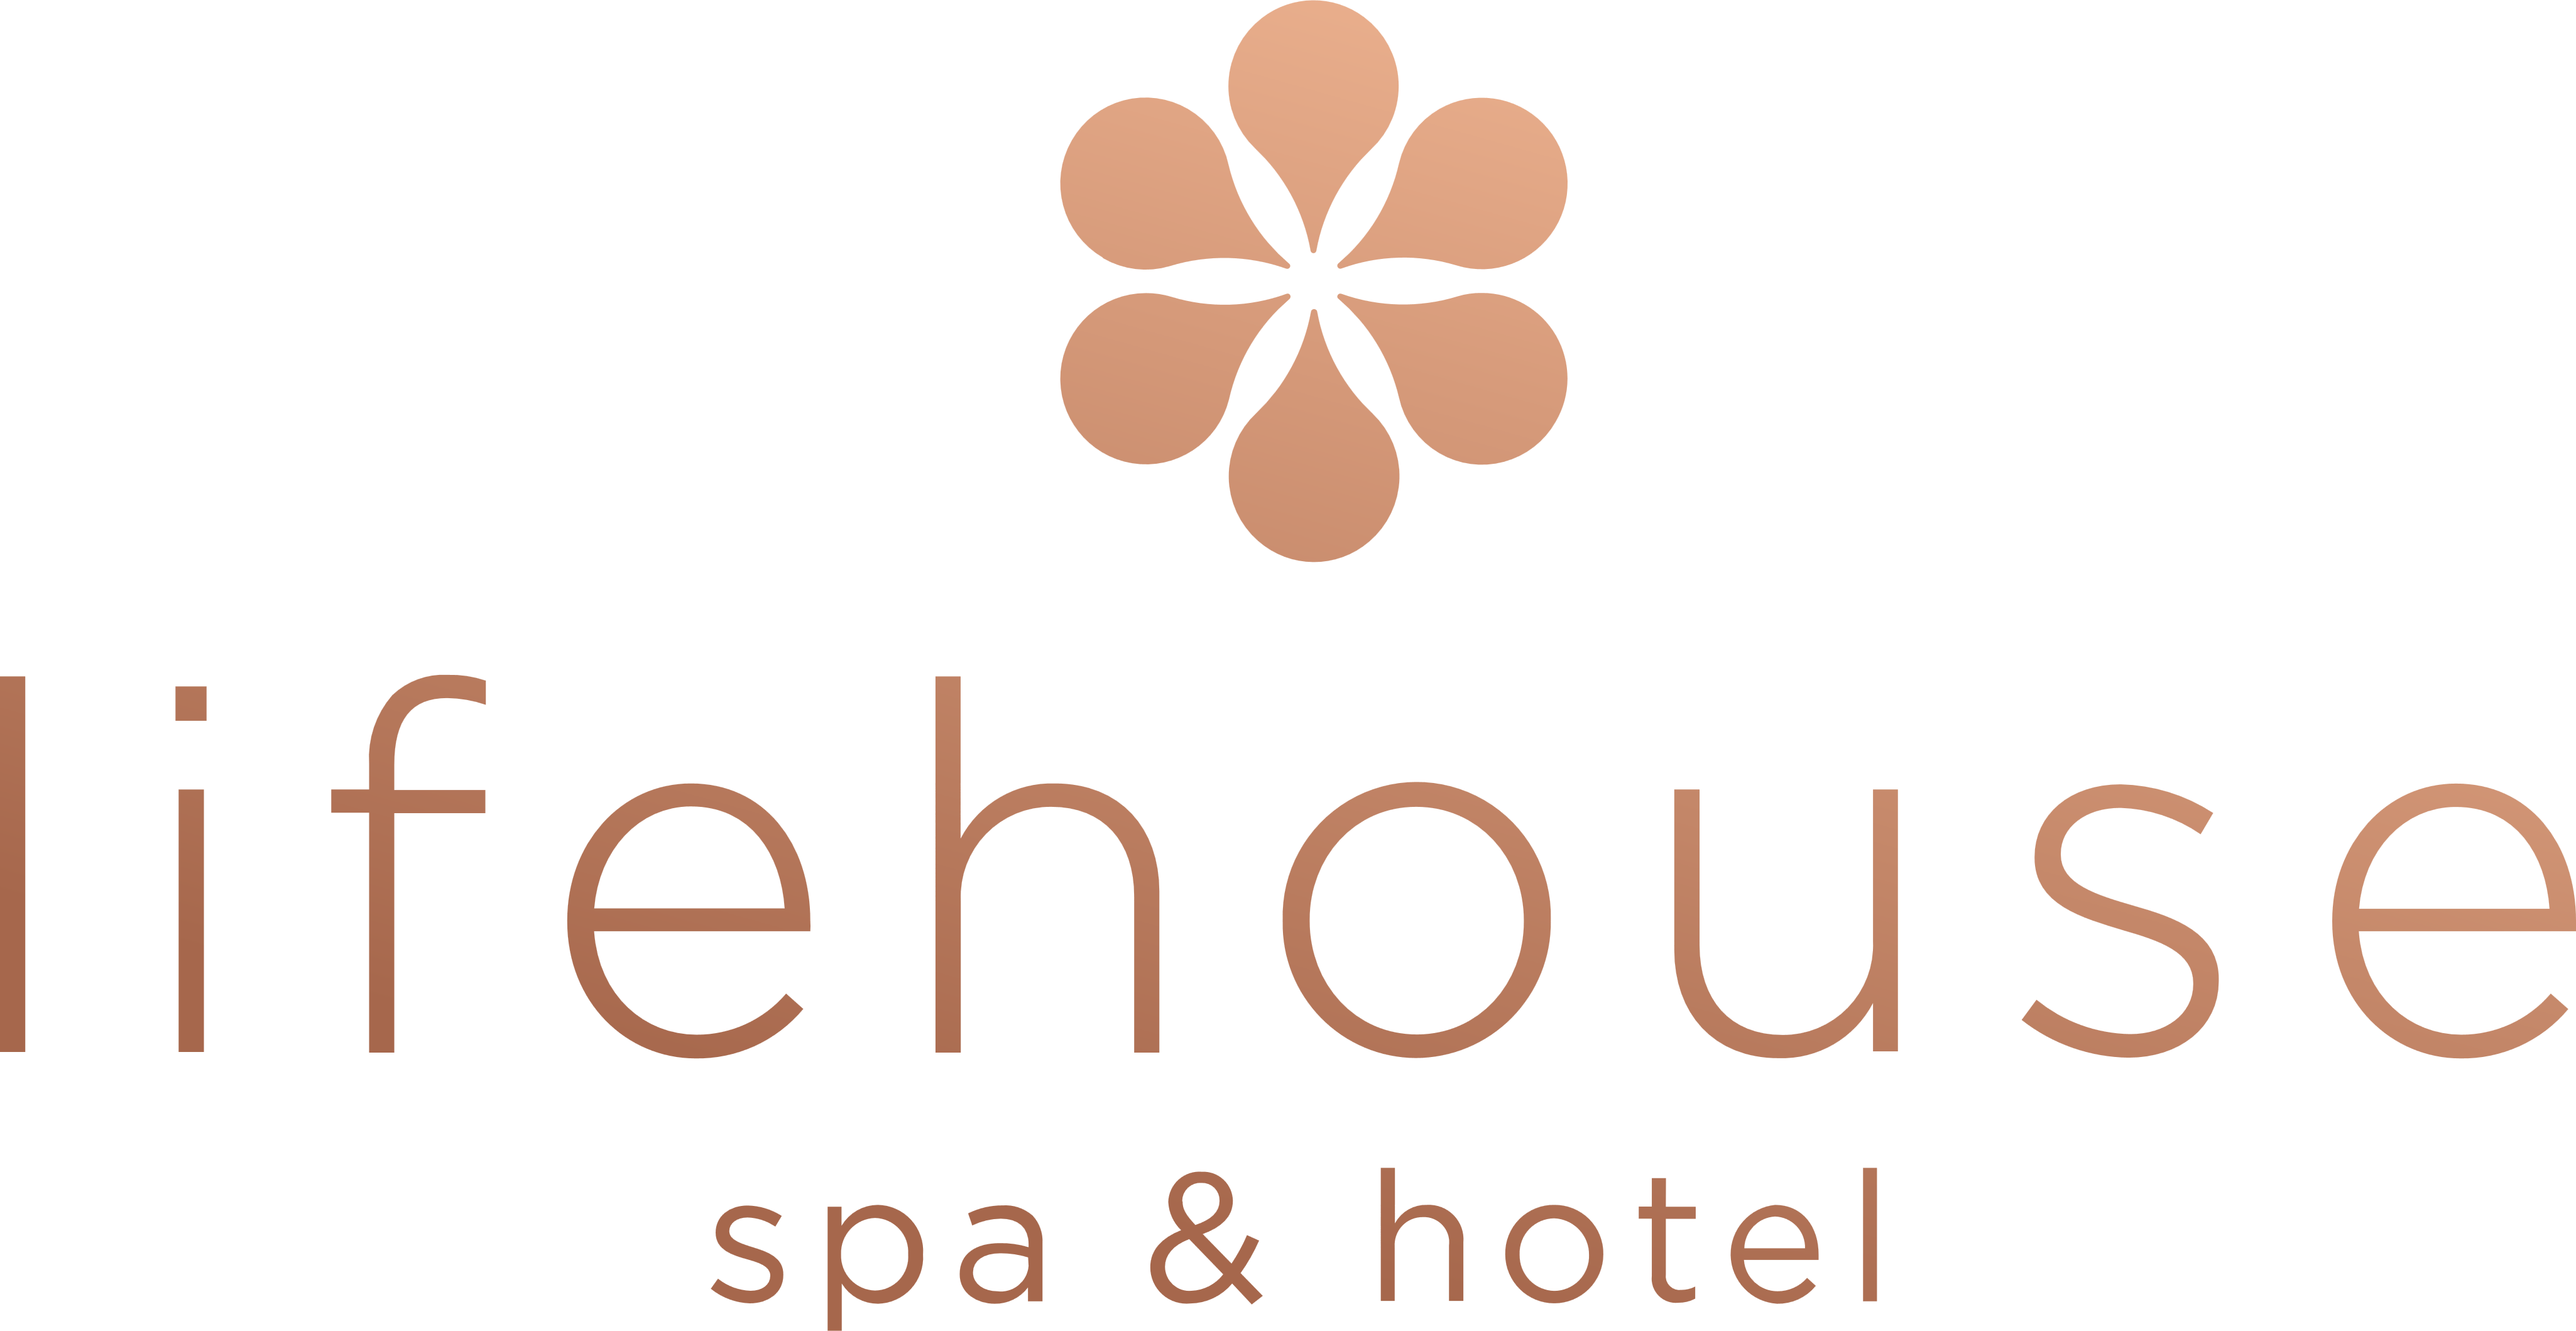 lifehouse spa & hotel logo picture